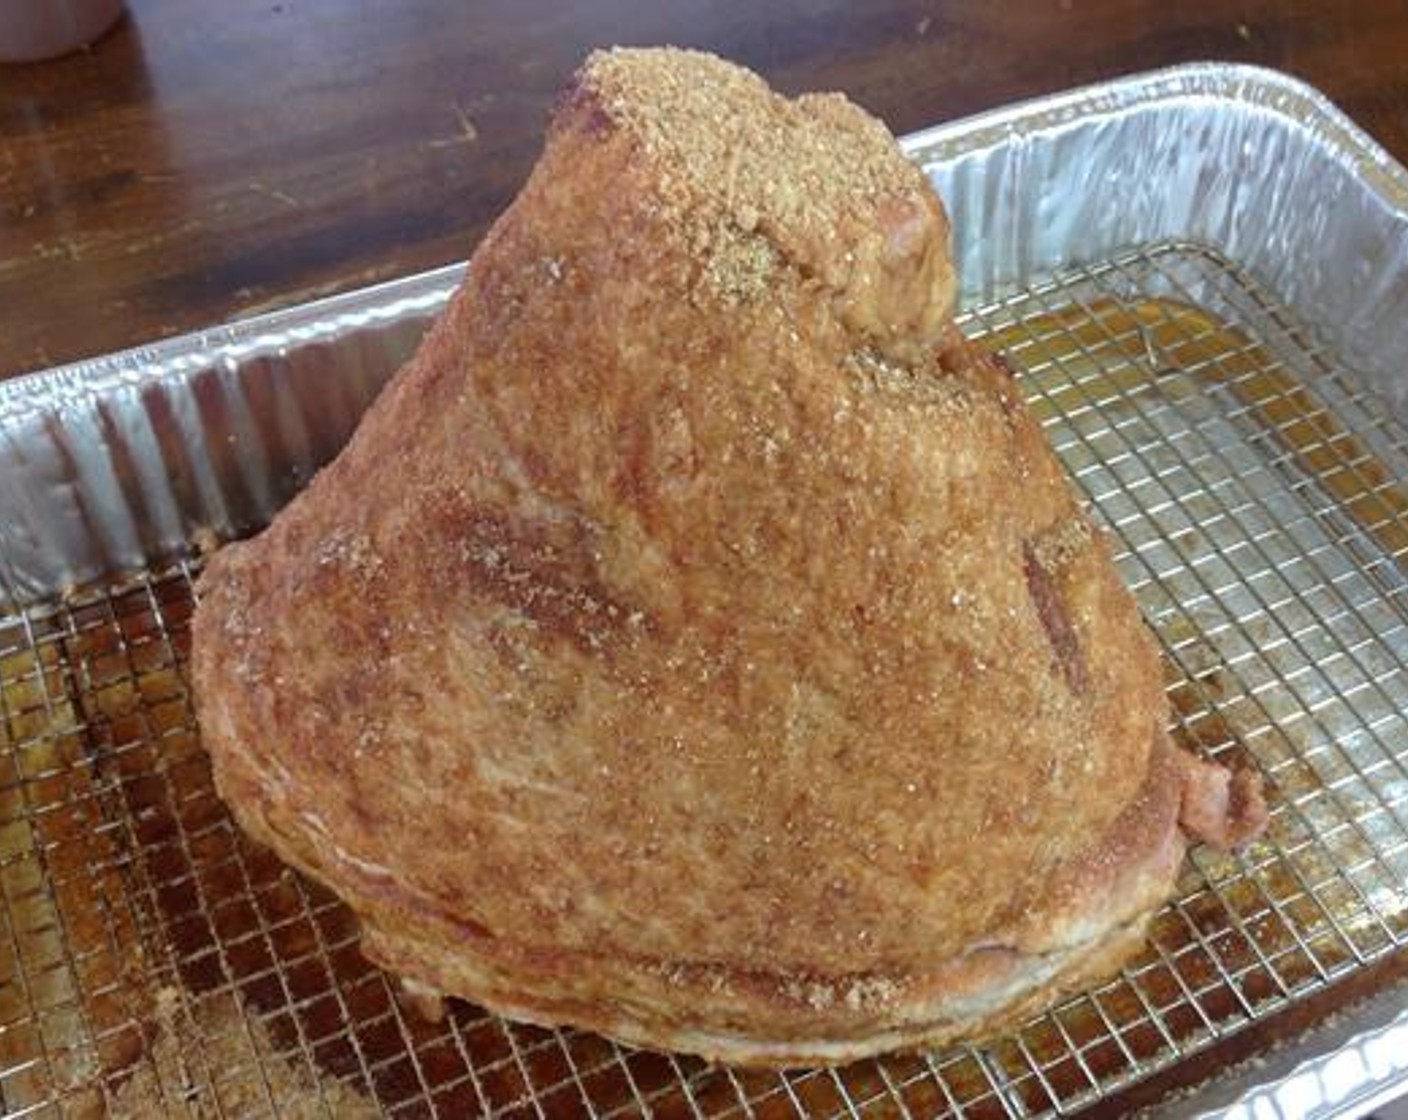 step 5 Once the outside of the ham is covered with the sugar mixture, it’s ready for the smoker. To cook the ham the smoker needs to be between 275-300 degrees F (140-150 degrees C).